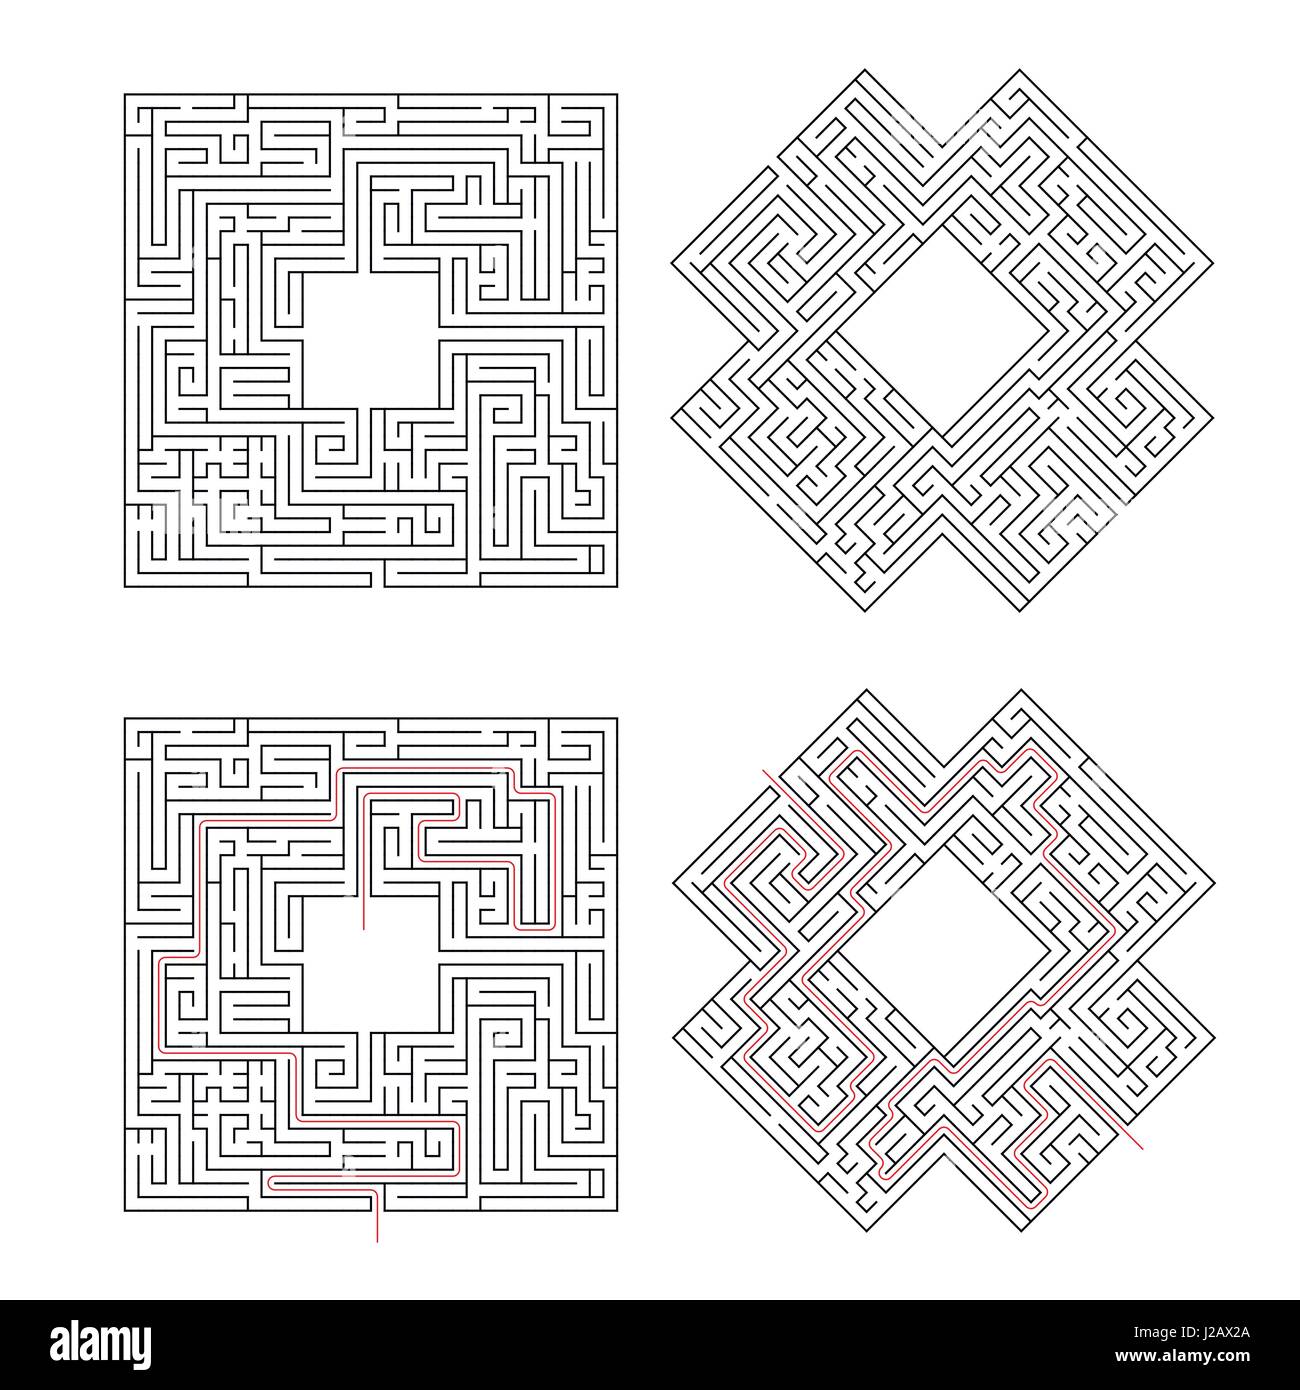 Complicated labyrinths with red path of solution isolated on white Stock Vector